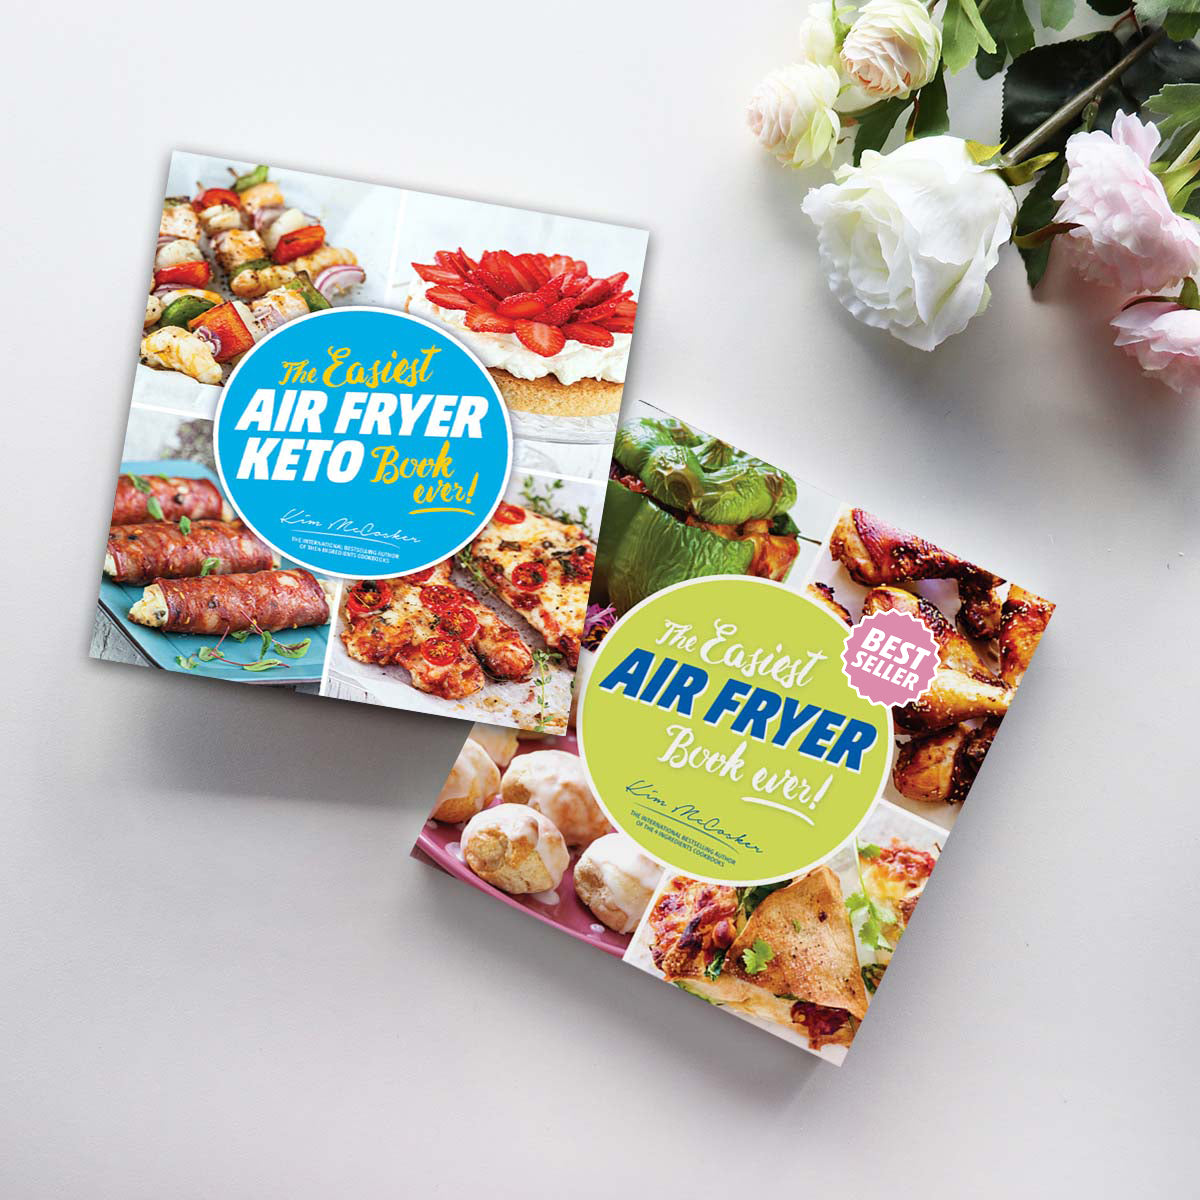 The Easiest KETO Air Fryer Book ever + The Easiest Air Fryer Book ever